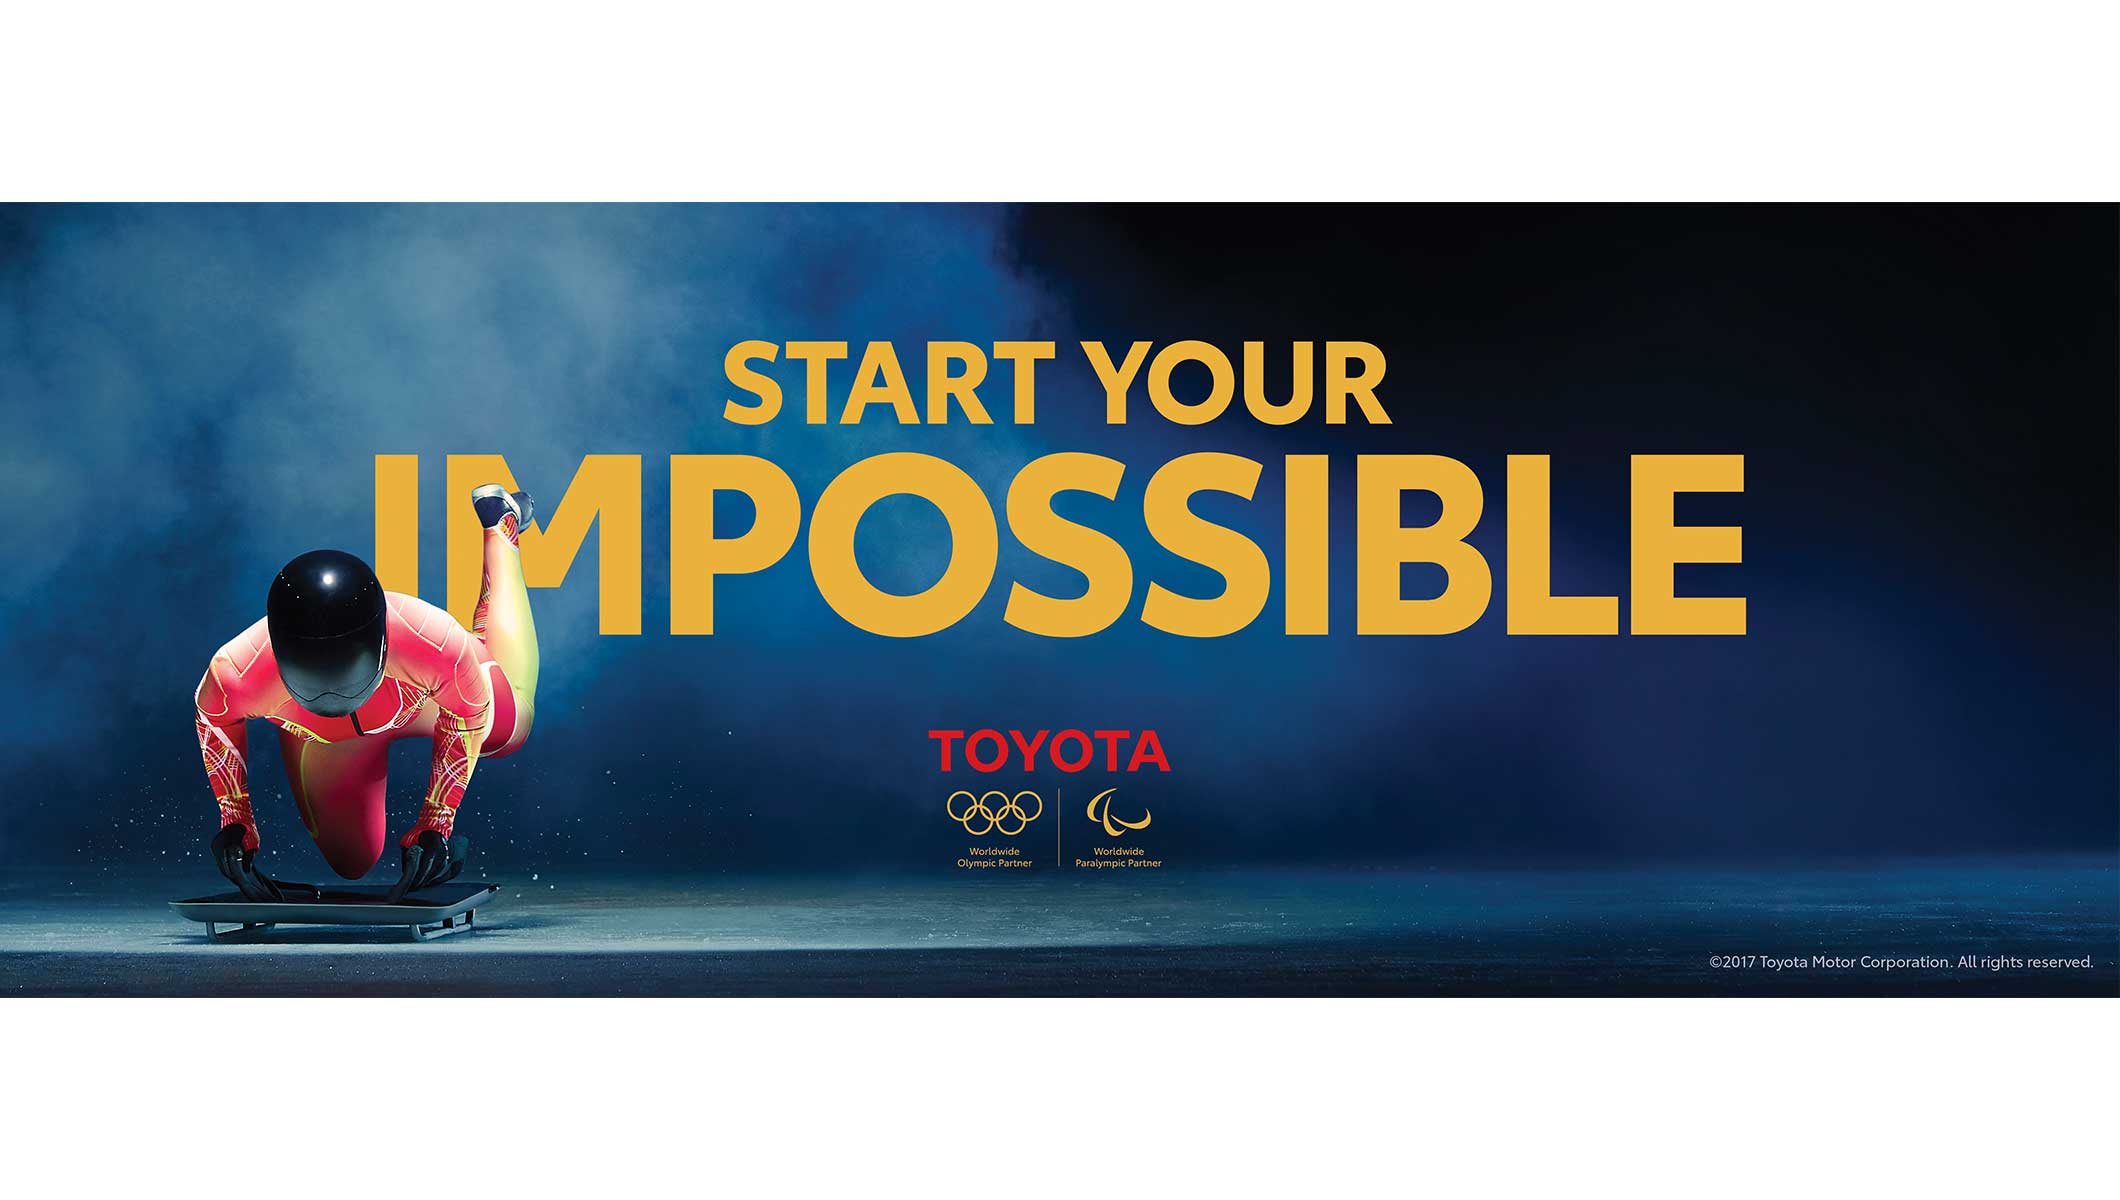 Toyota invite the world to “Start Your Impossible” Olympic News